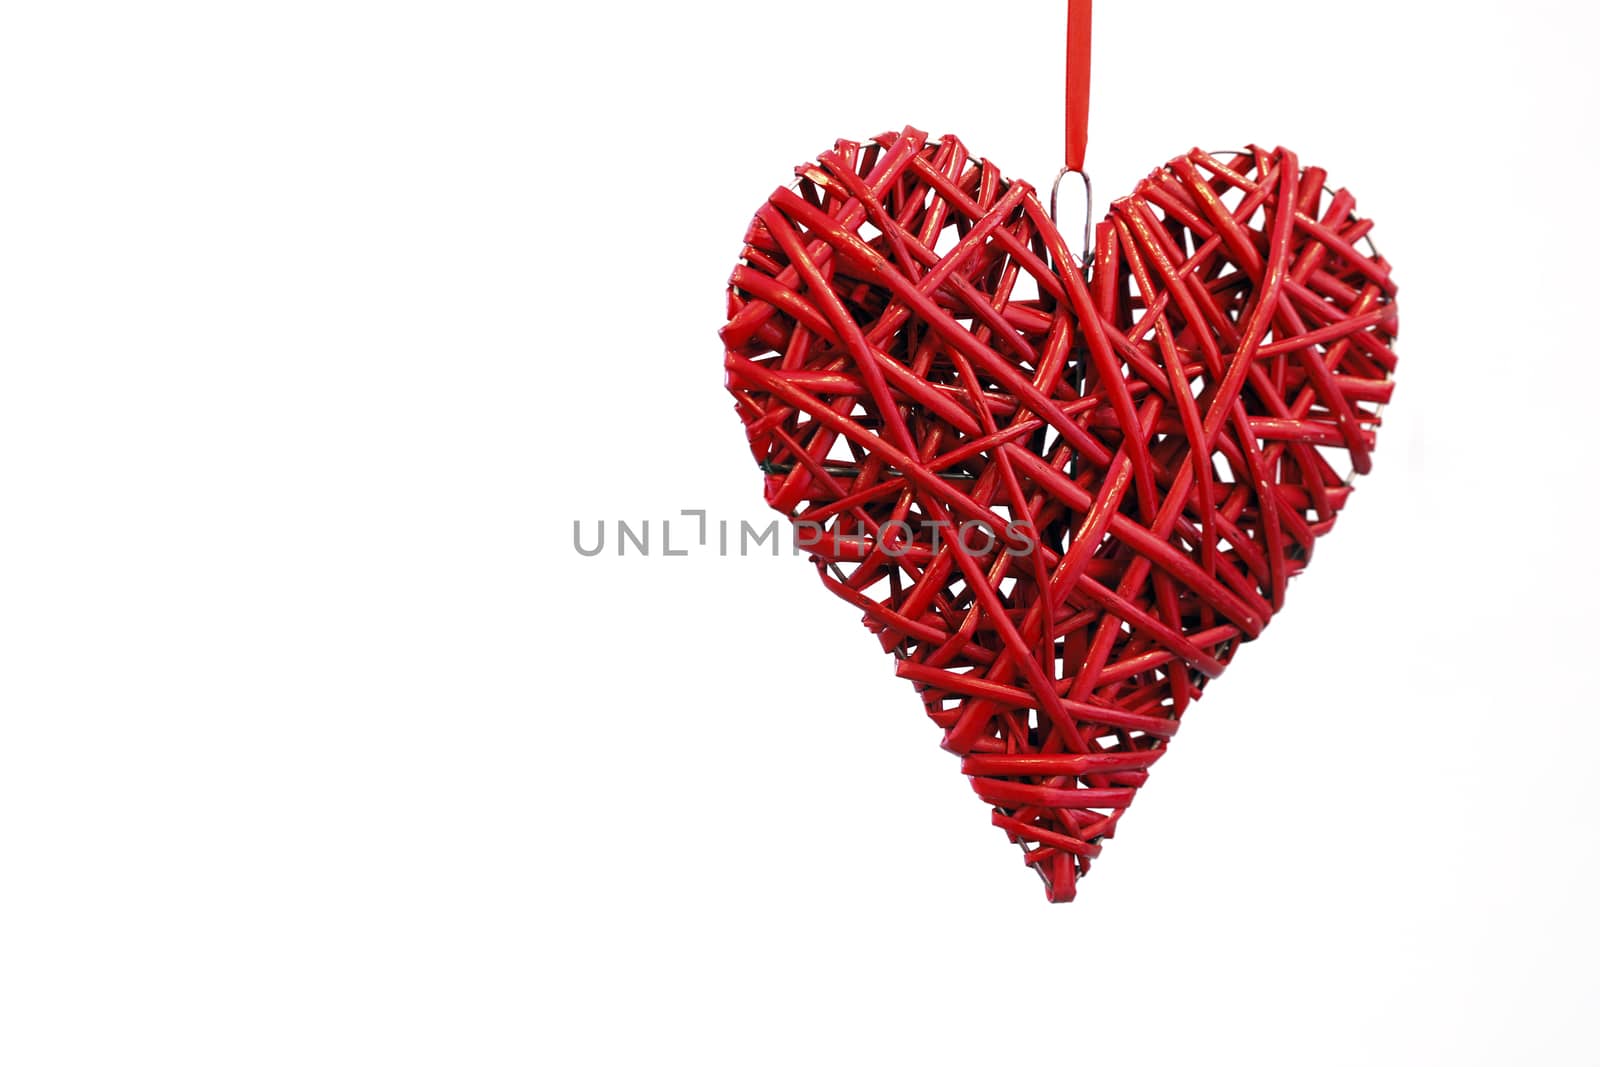 Hand made red heart - symbol of love